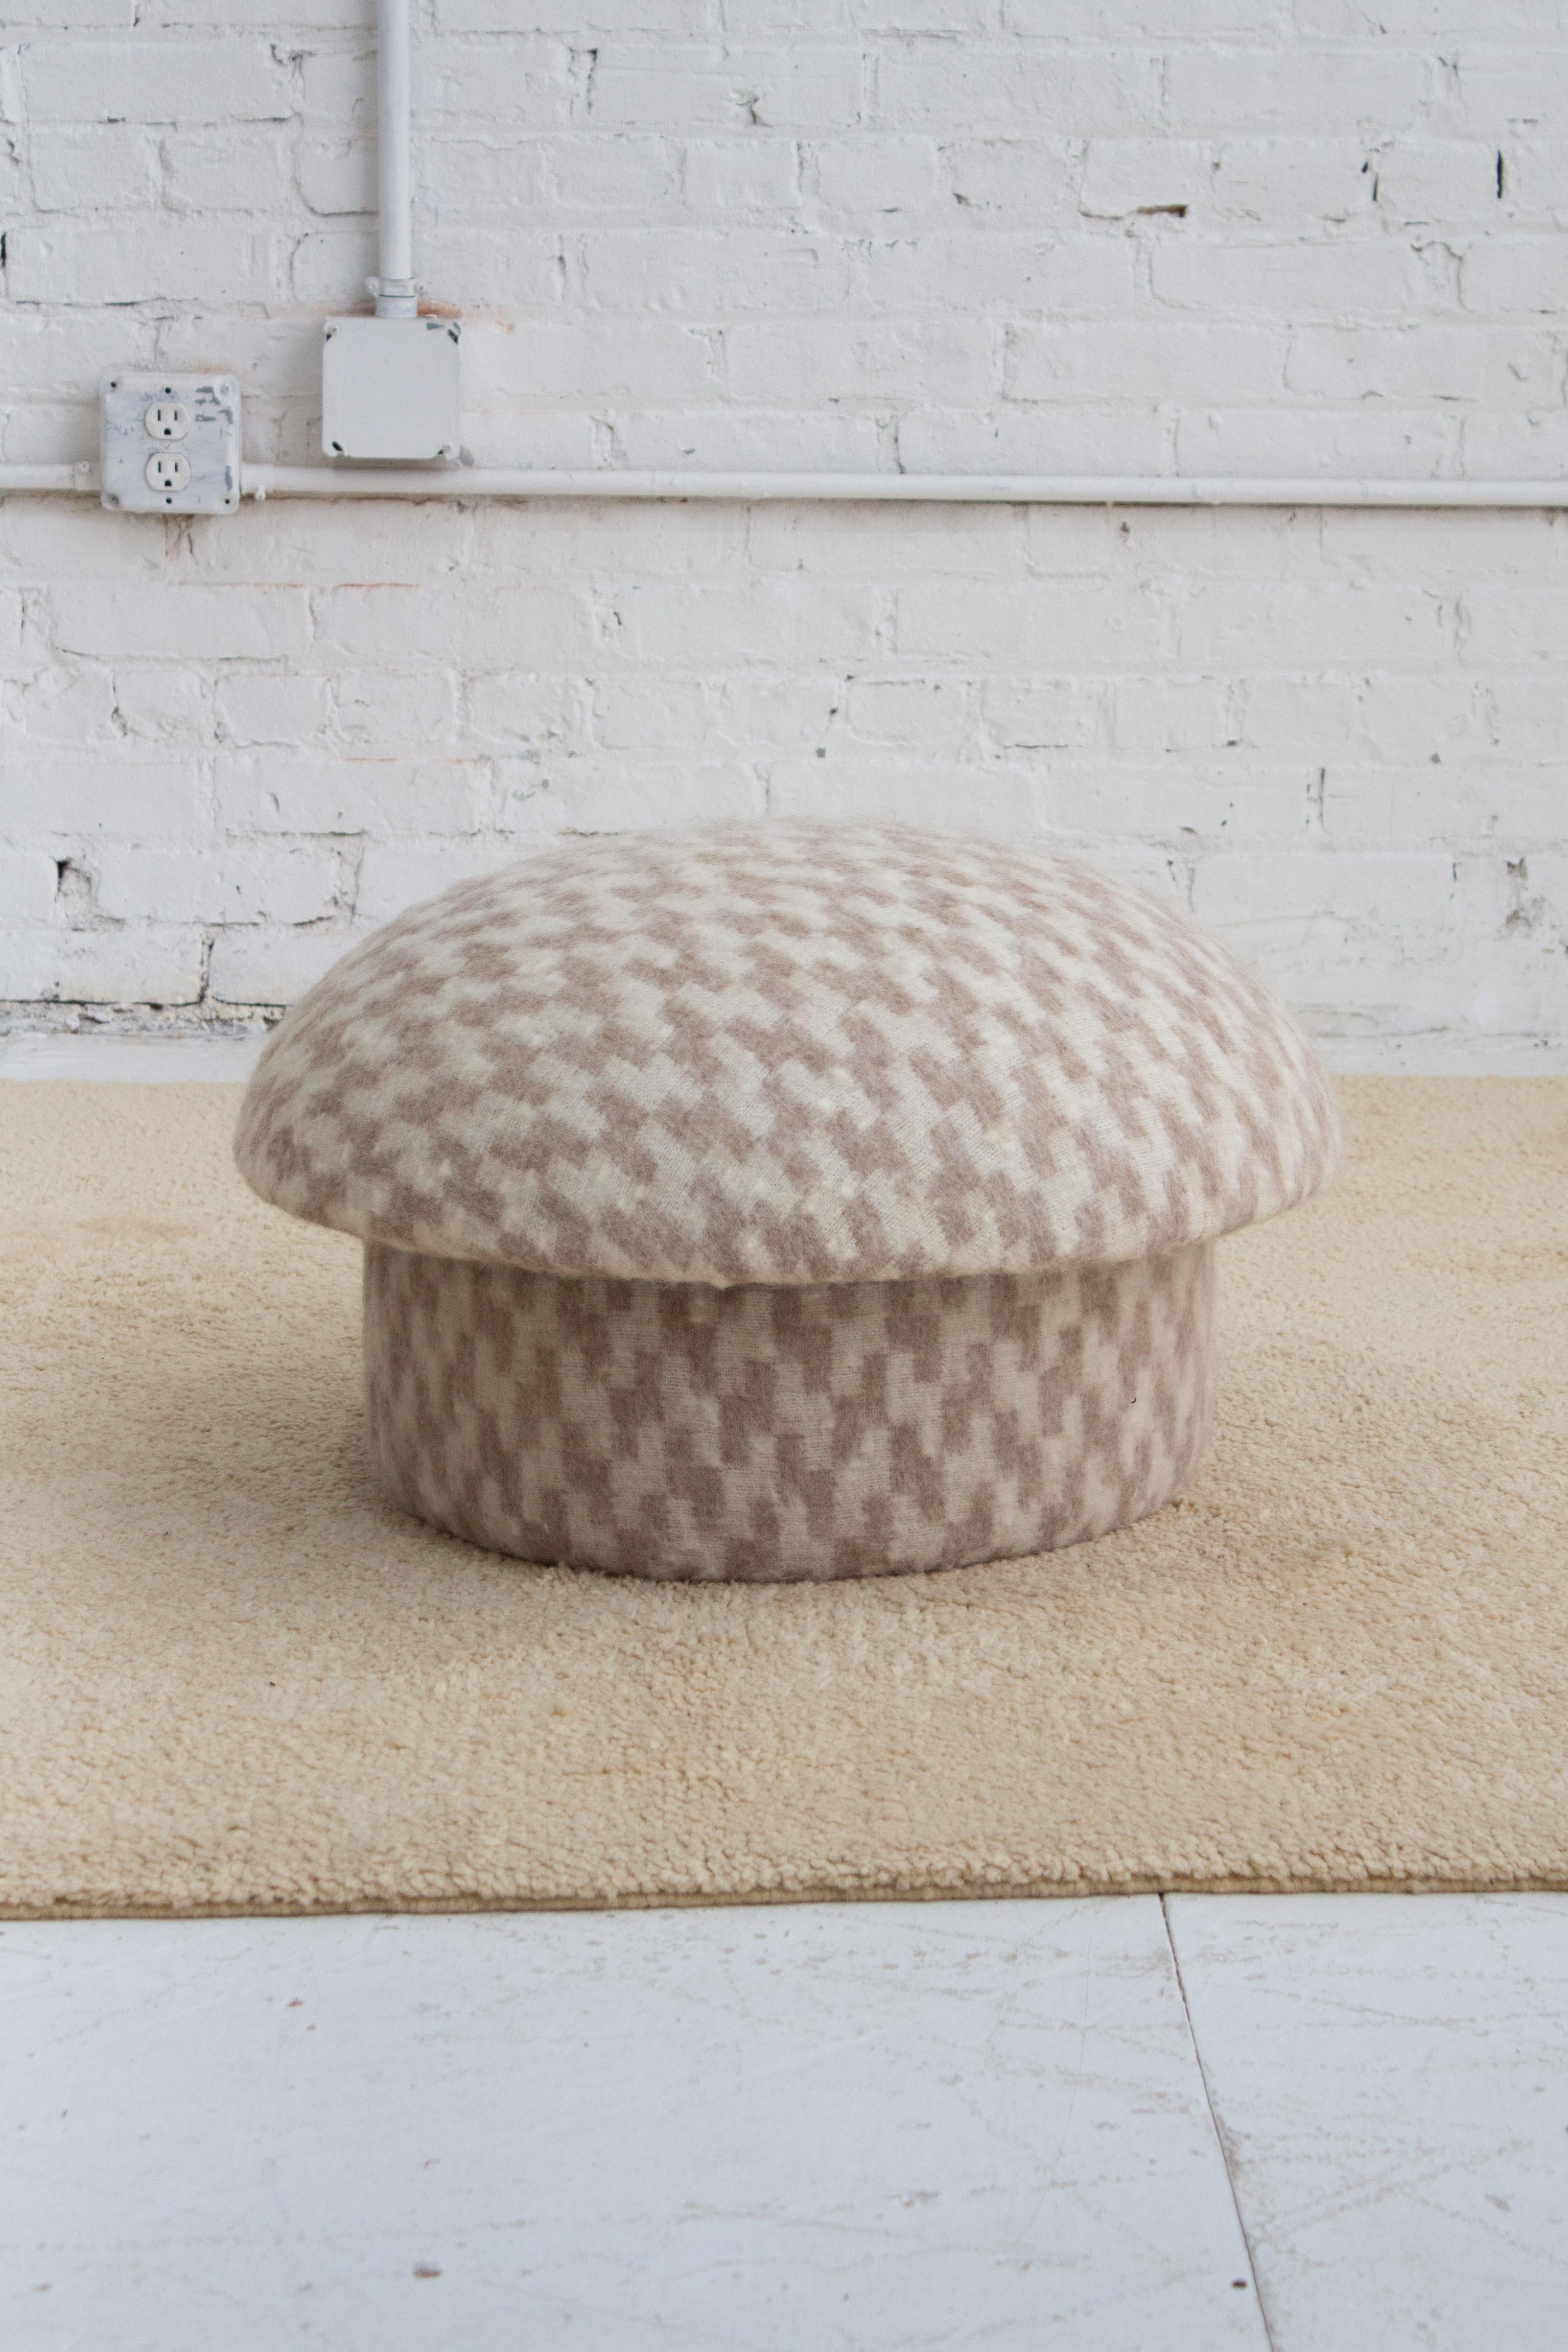 A classic mid century mushroom ottoman. Newly reupholstered in a cream and beige textured wool fabric.